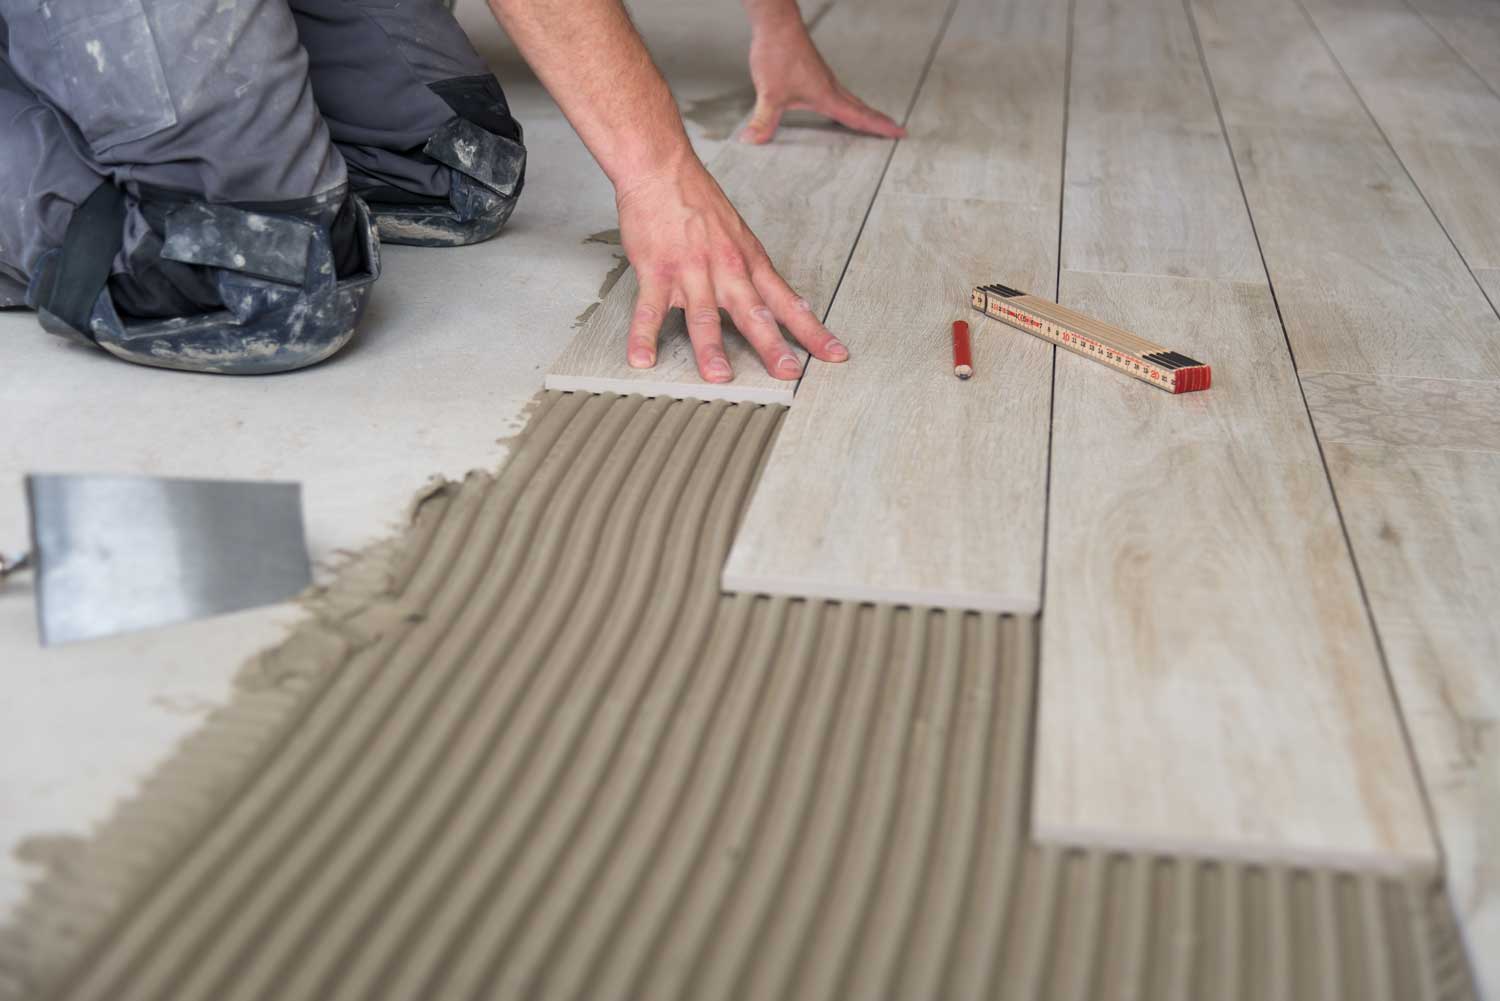 At Footprints Floors, our tile contractors in Carmel get the job done - just read the reviews!